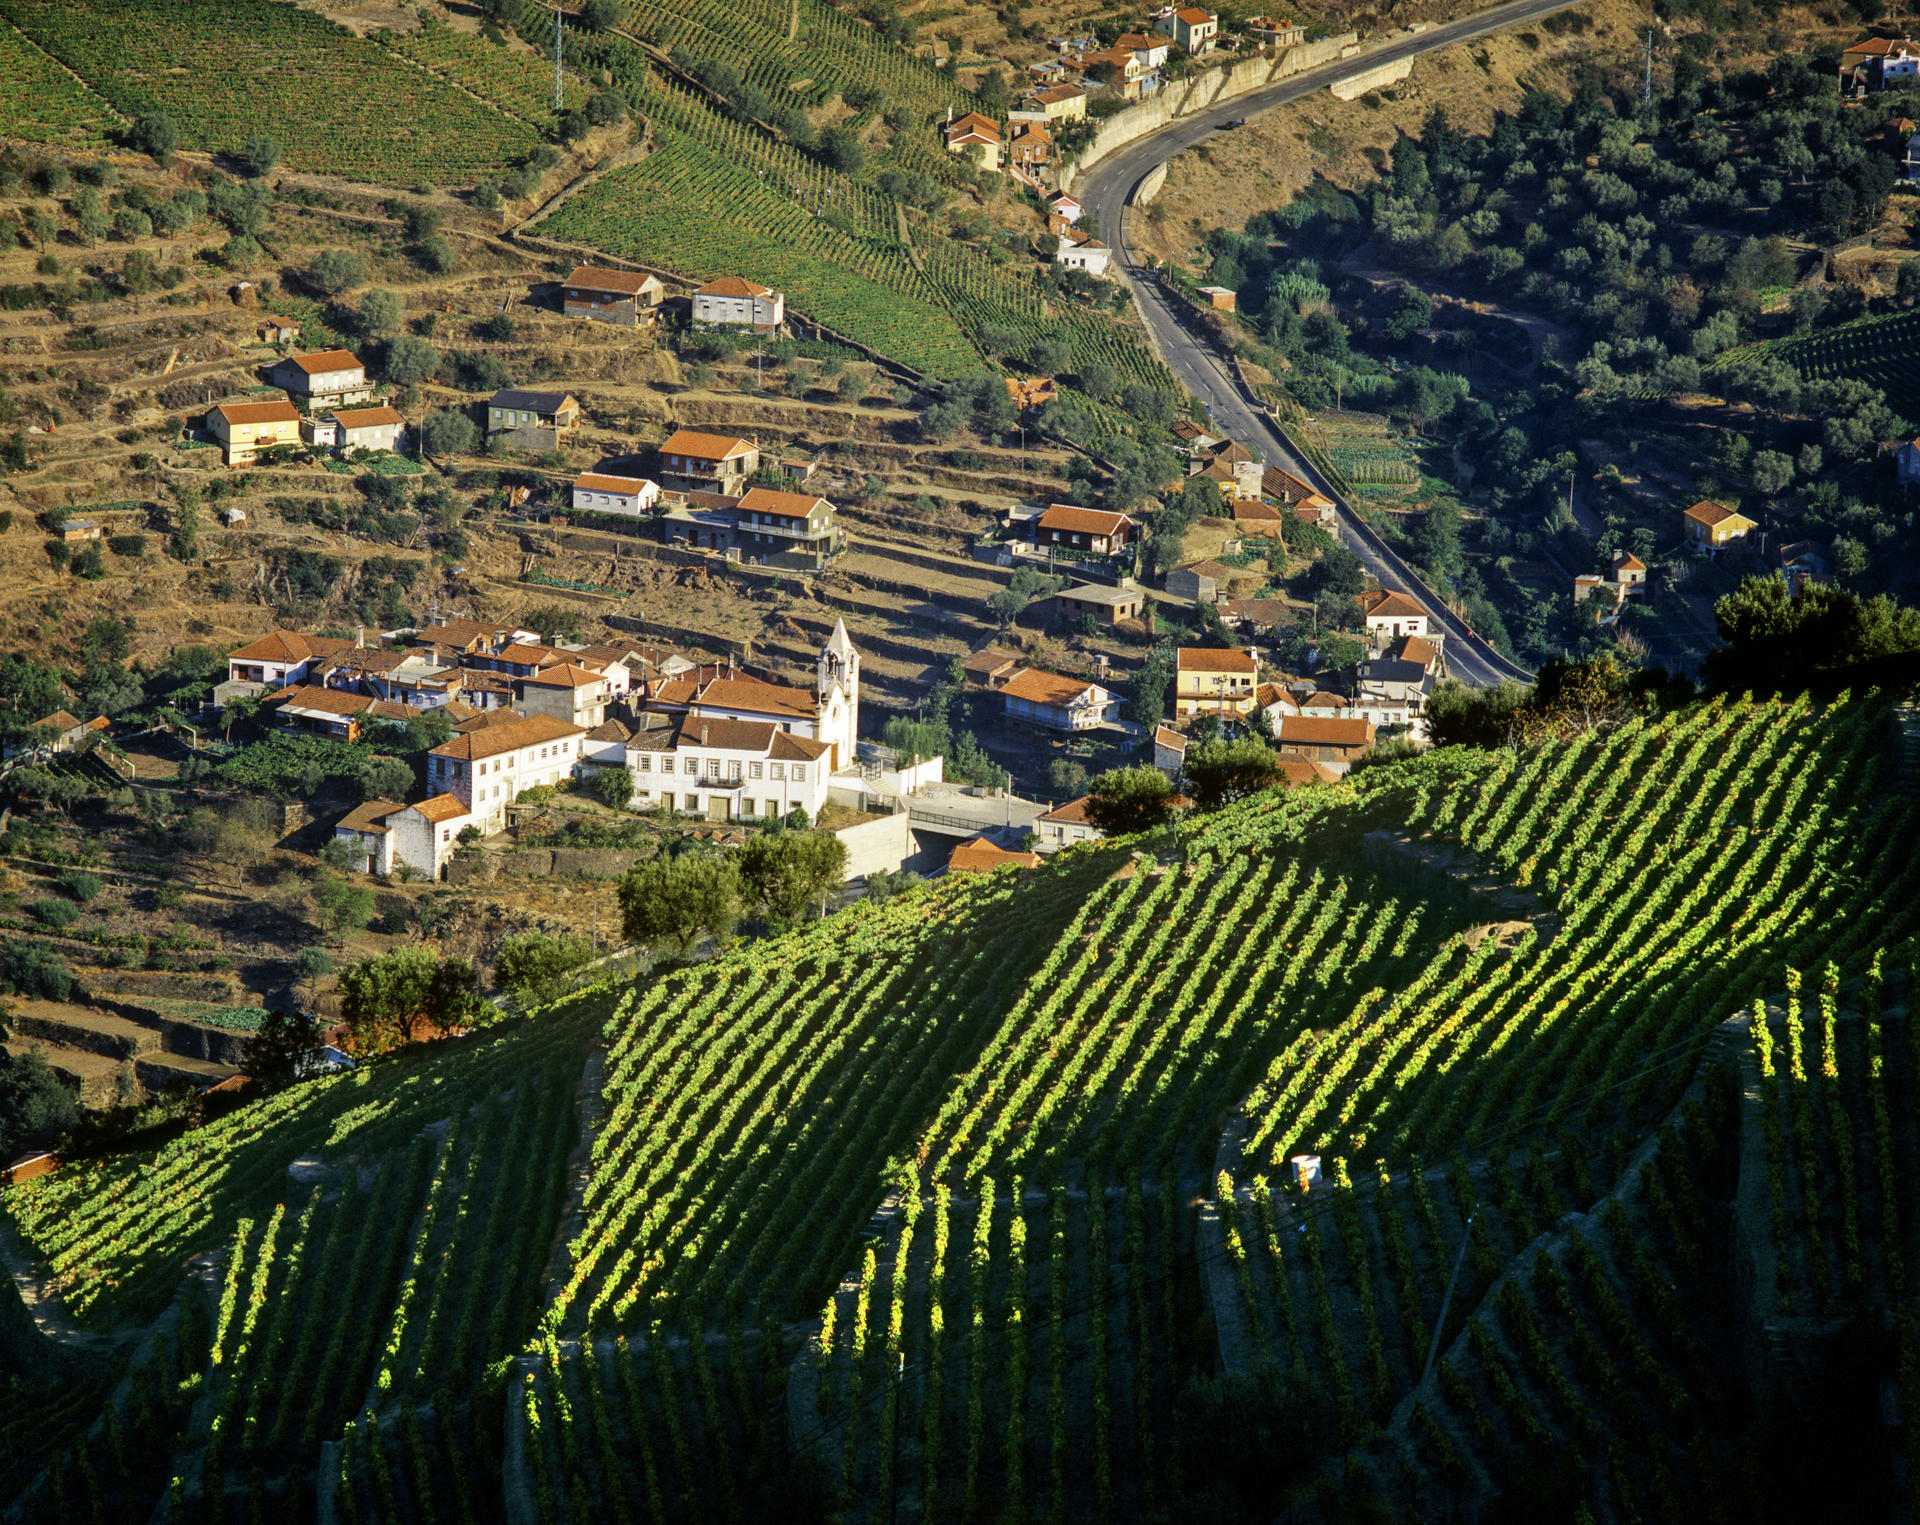 Vineyards in Portugal's Douro region, home of the famed Port wine and a Unesco World Heritage Site. Photo: Mauricio Abreu